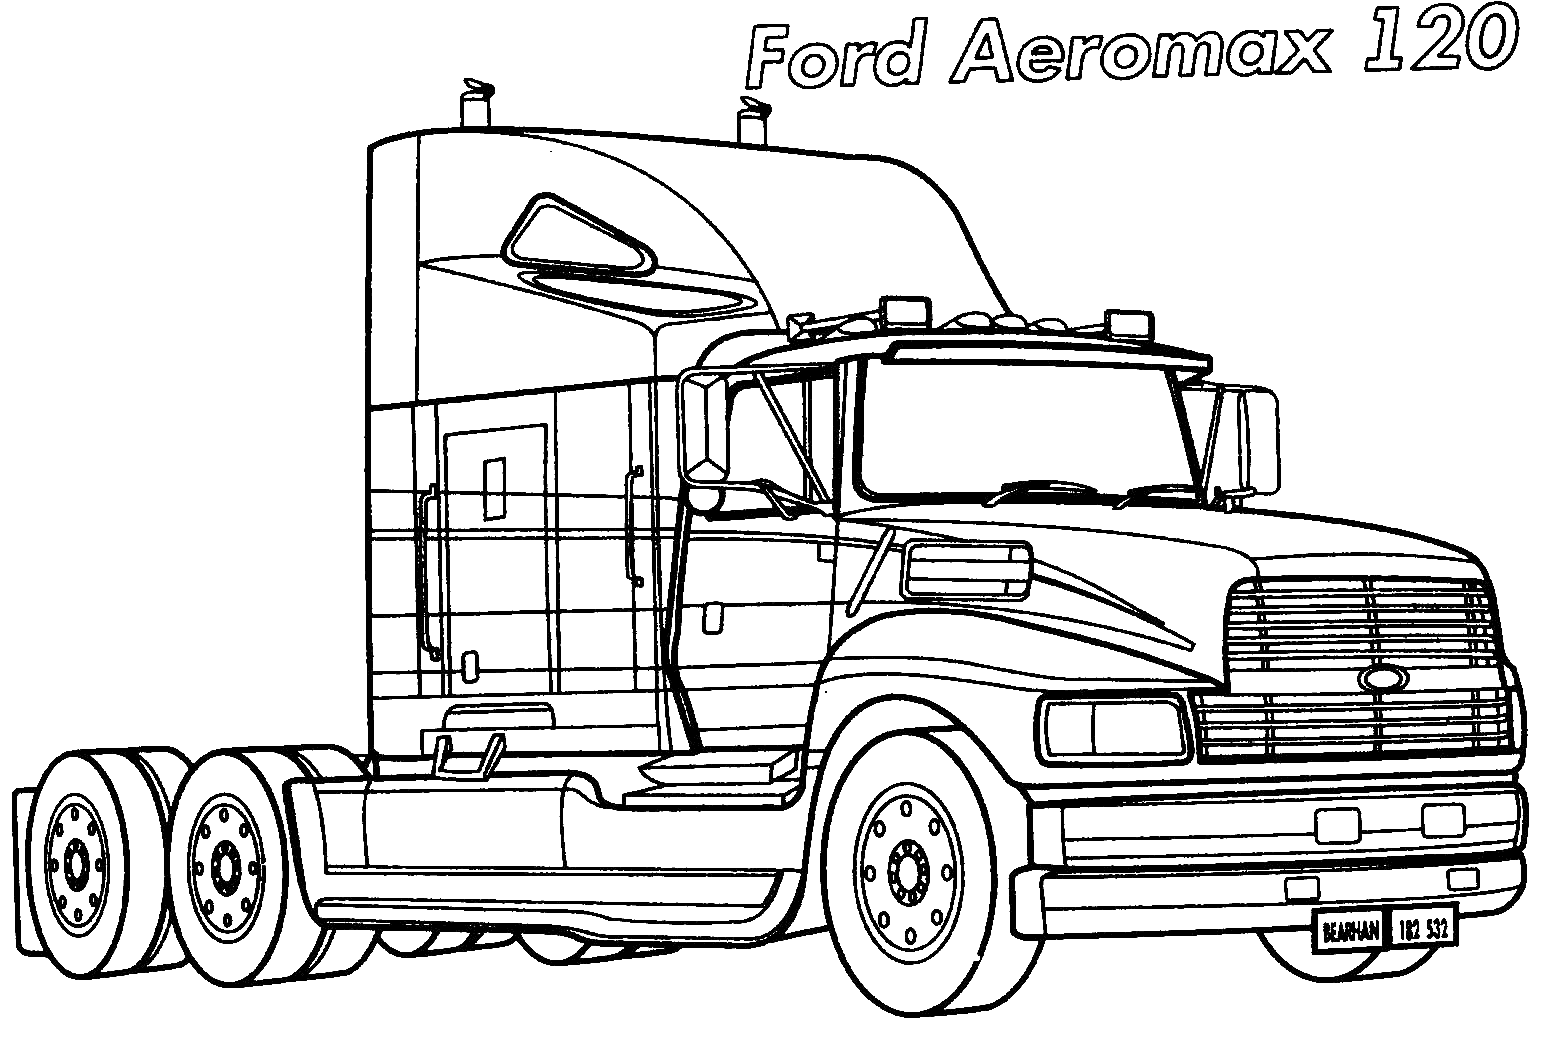 Coloring page - Ford Aeromaks 120